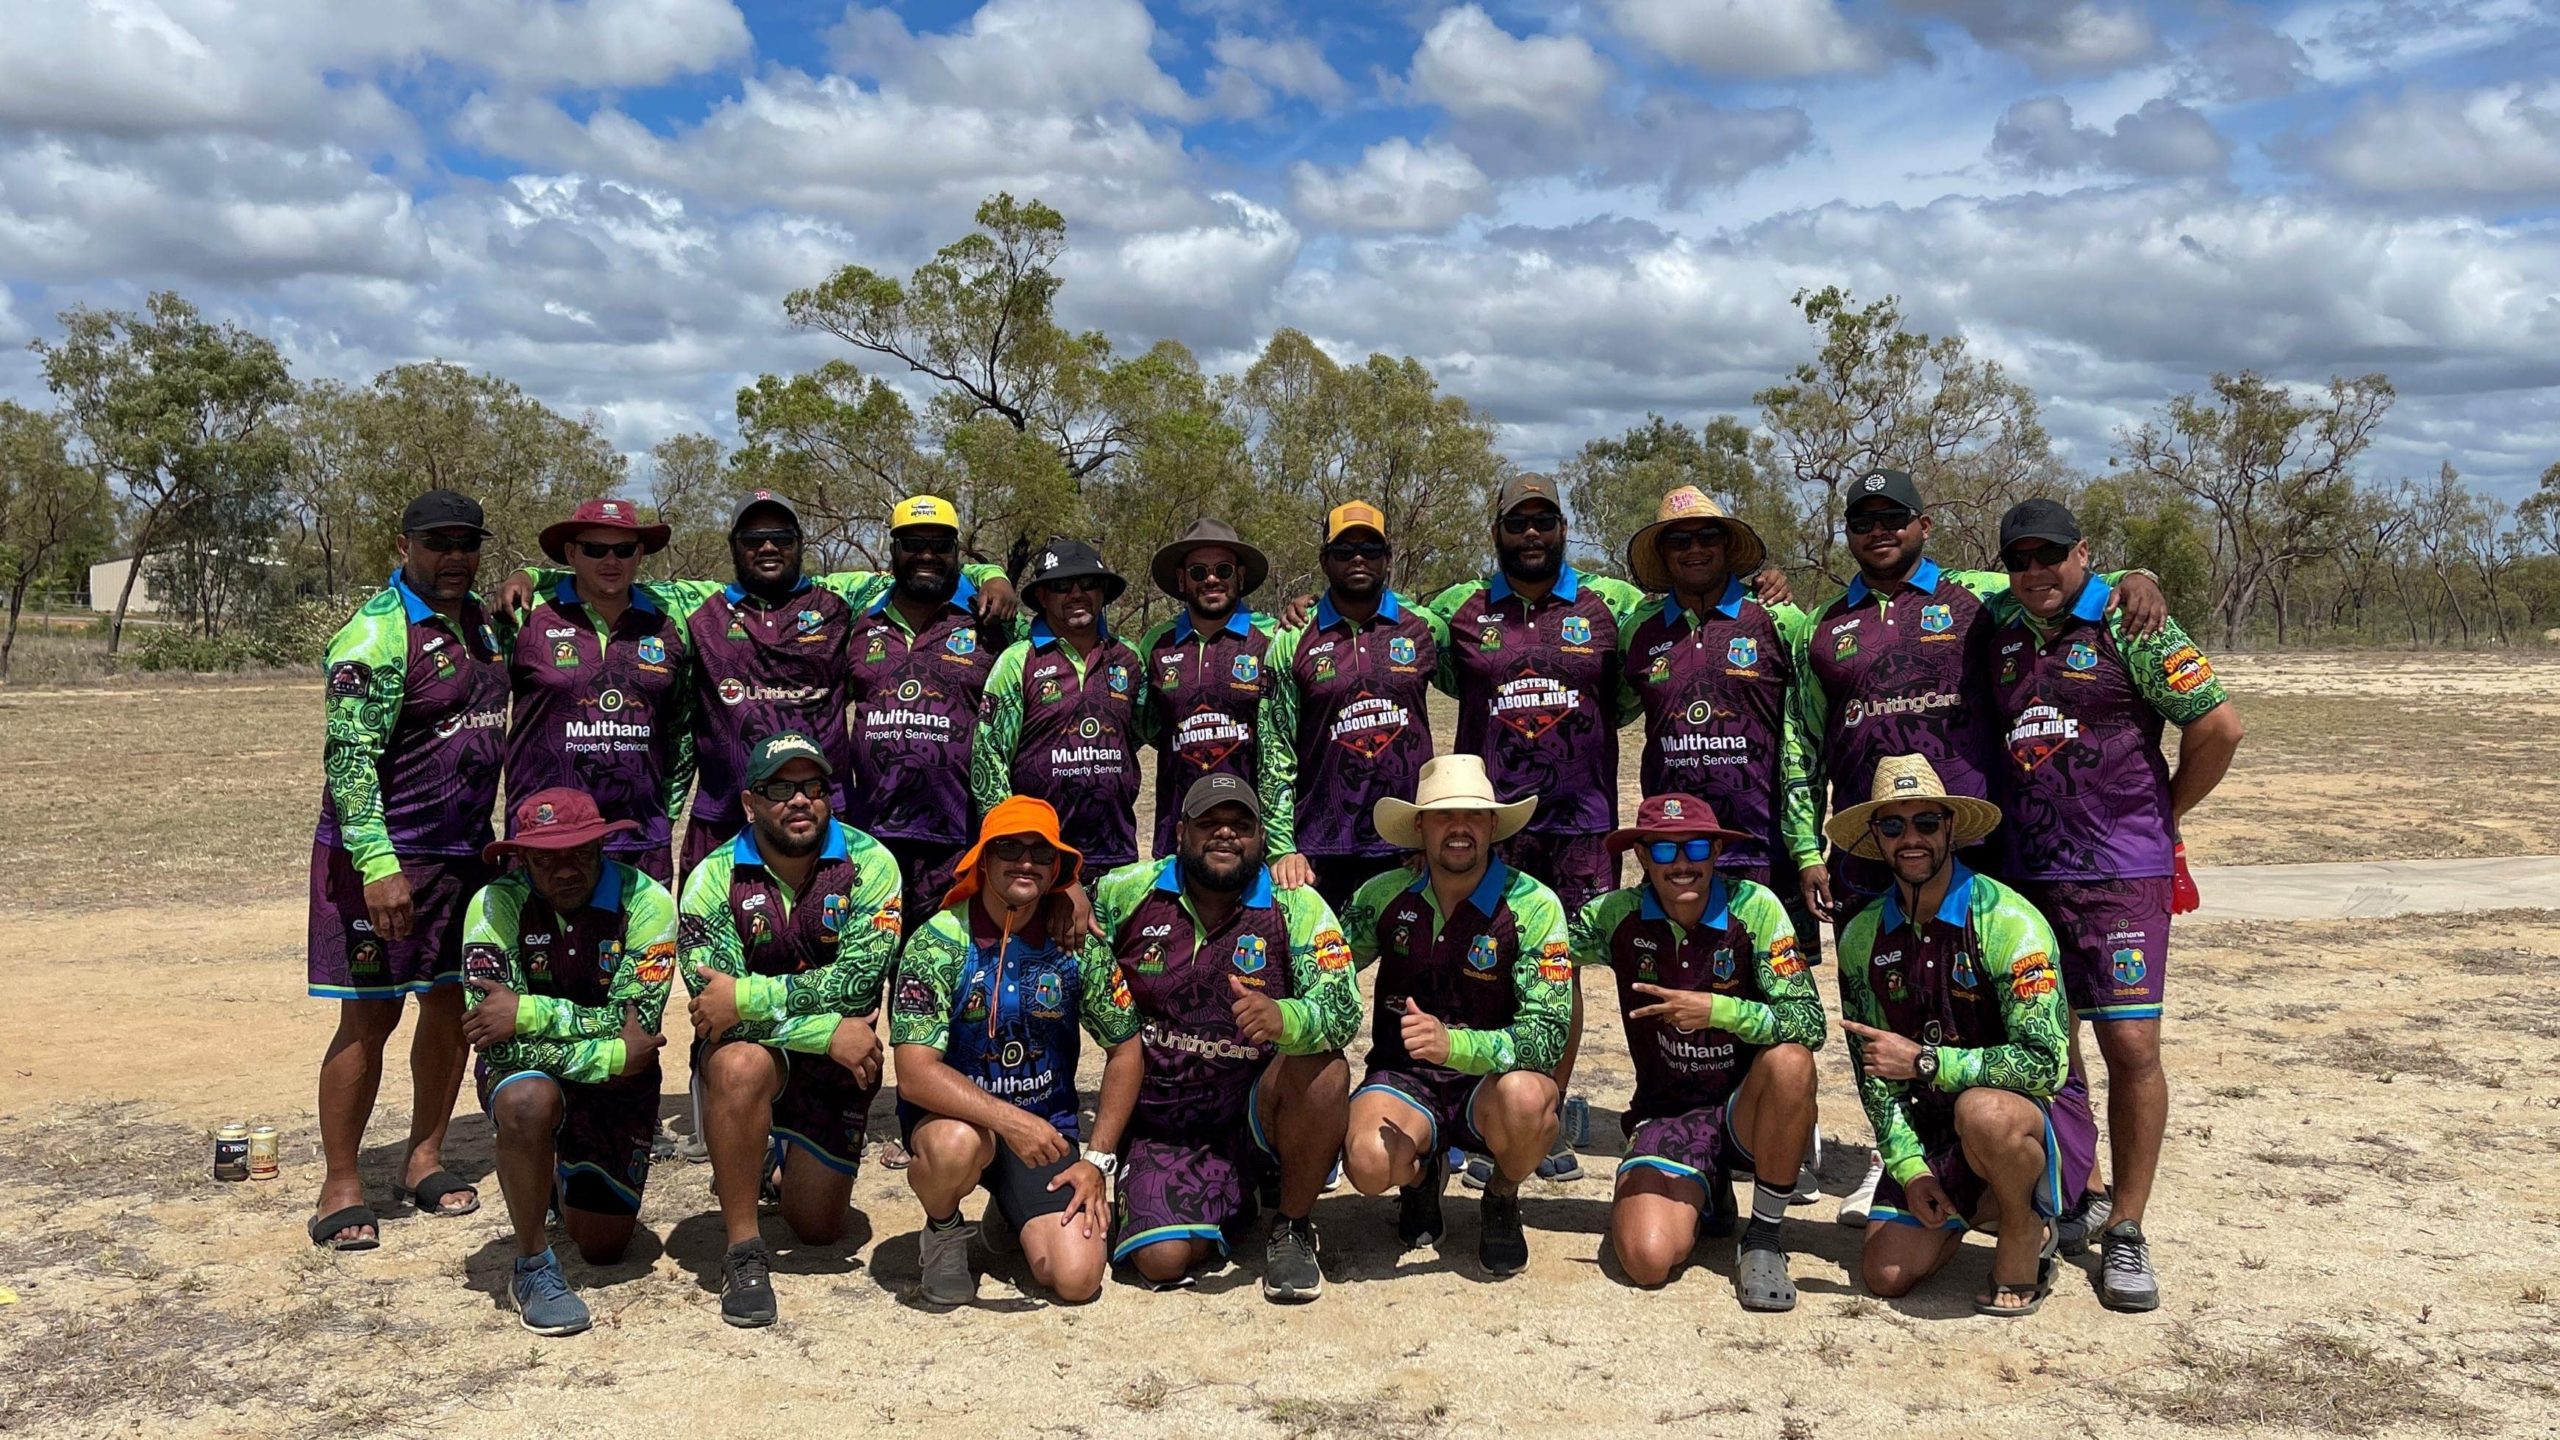 Multhana Property Services - Sponsorships - West Indigies Townsville Cricket Team